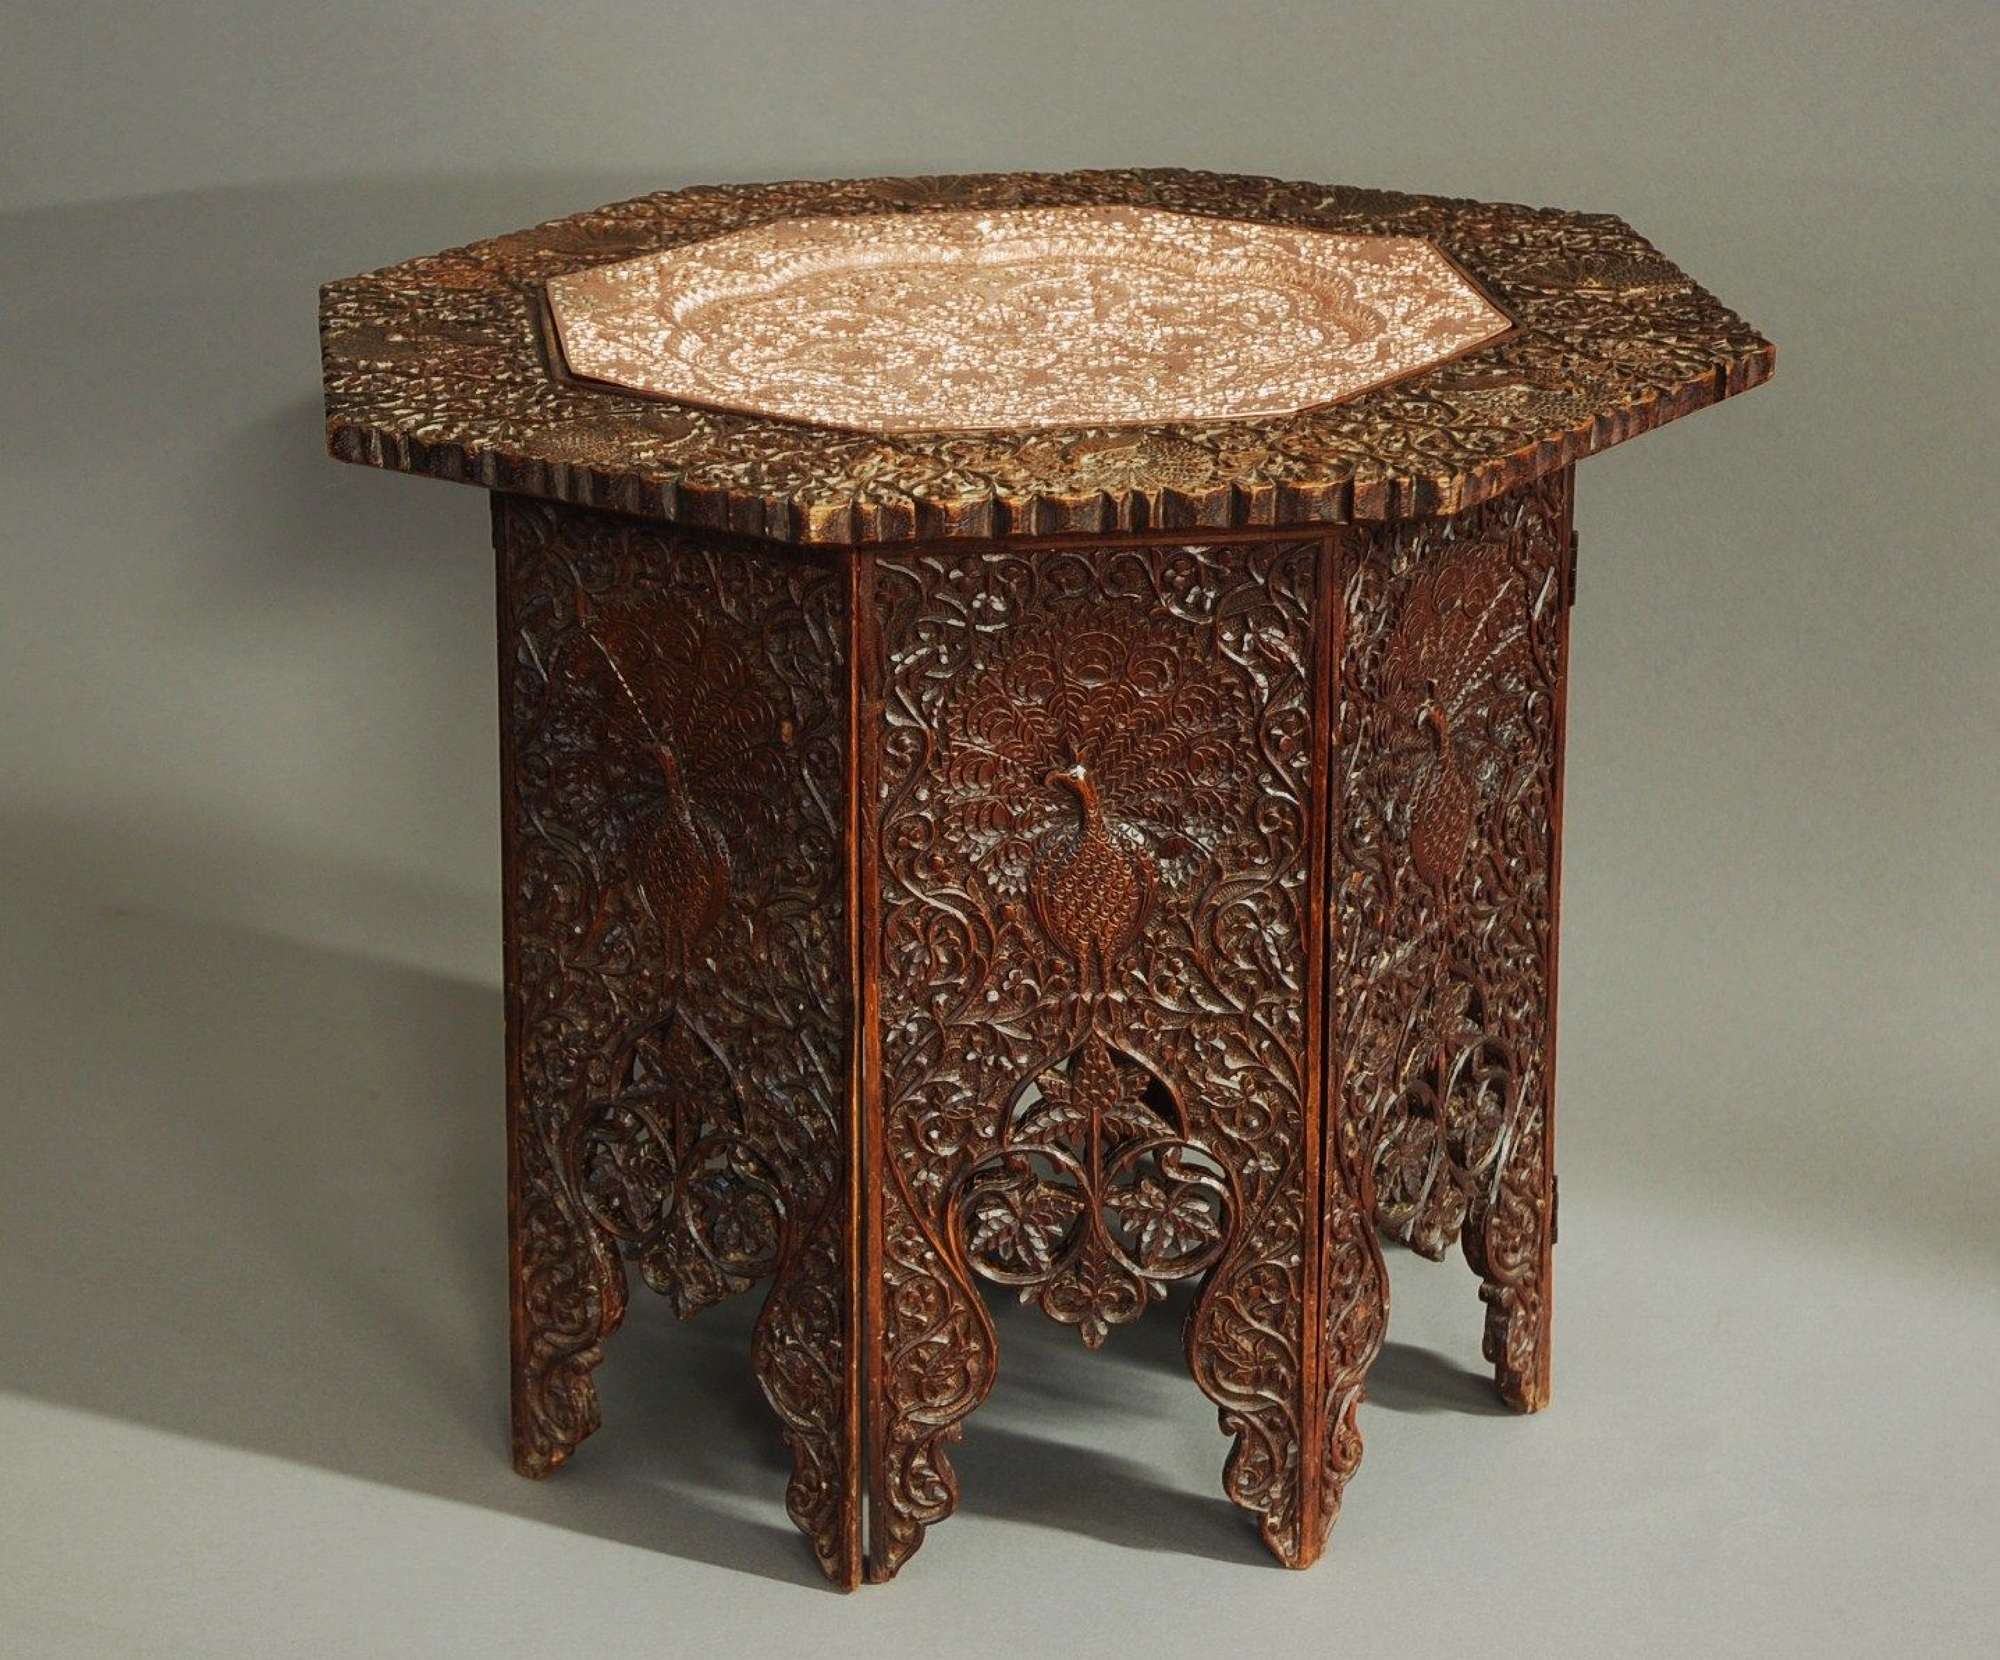 19thc Indian octagonal carved hardwood table